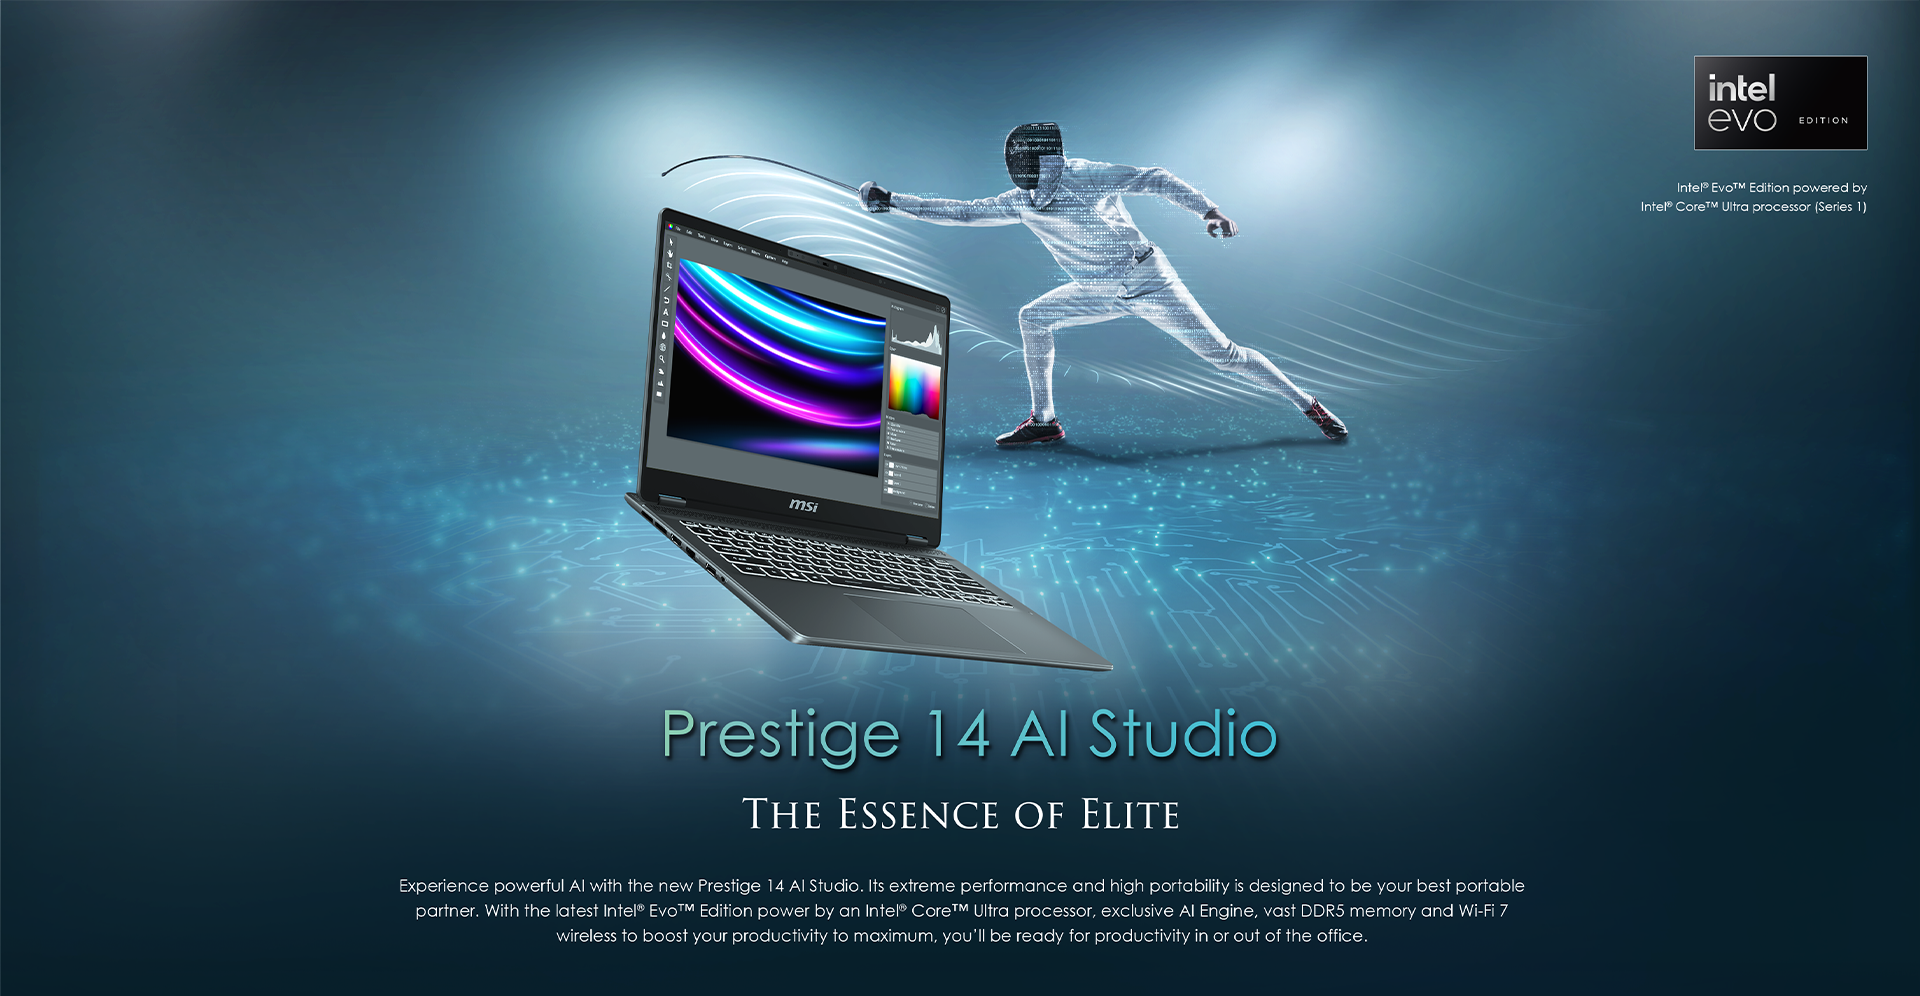 Experience powerful AI with the new Prestige 14 AI Studio. Its extreme performance and high portability is designed to be your best portable partner. With the latest Intel® Evo™ Edition powered by up to Intel® Core™ Ultra 9 processor 185H, exclusive MSI AI Engine, vast DDR5 memory and Wi-Fi 7 wireless to boost your productivity to maximum, you'll be ready for productivity in or out of the office.